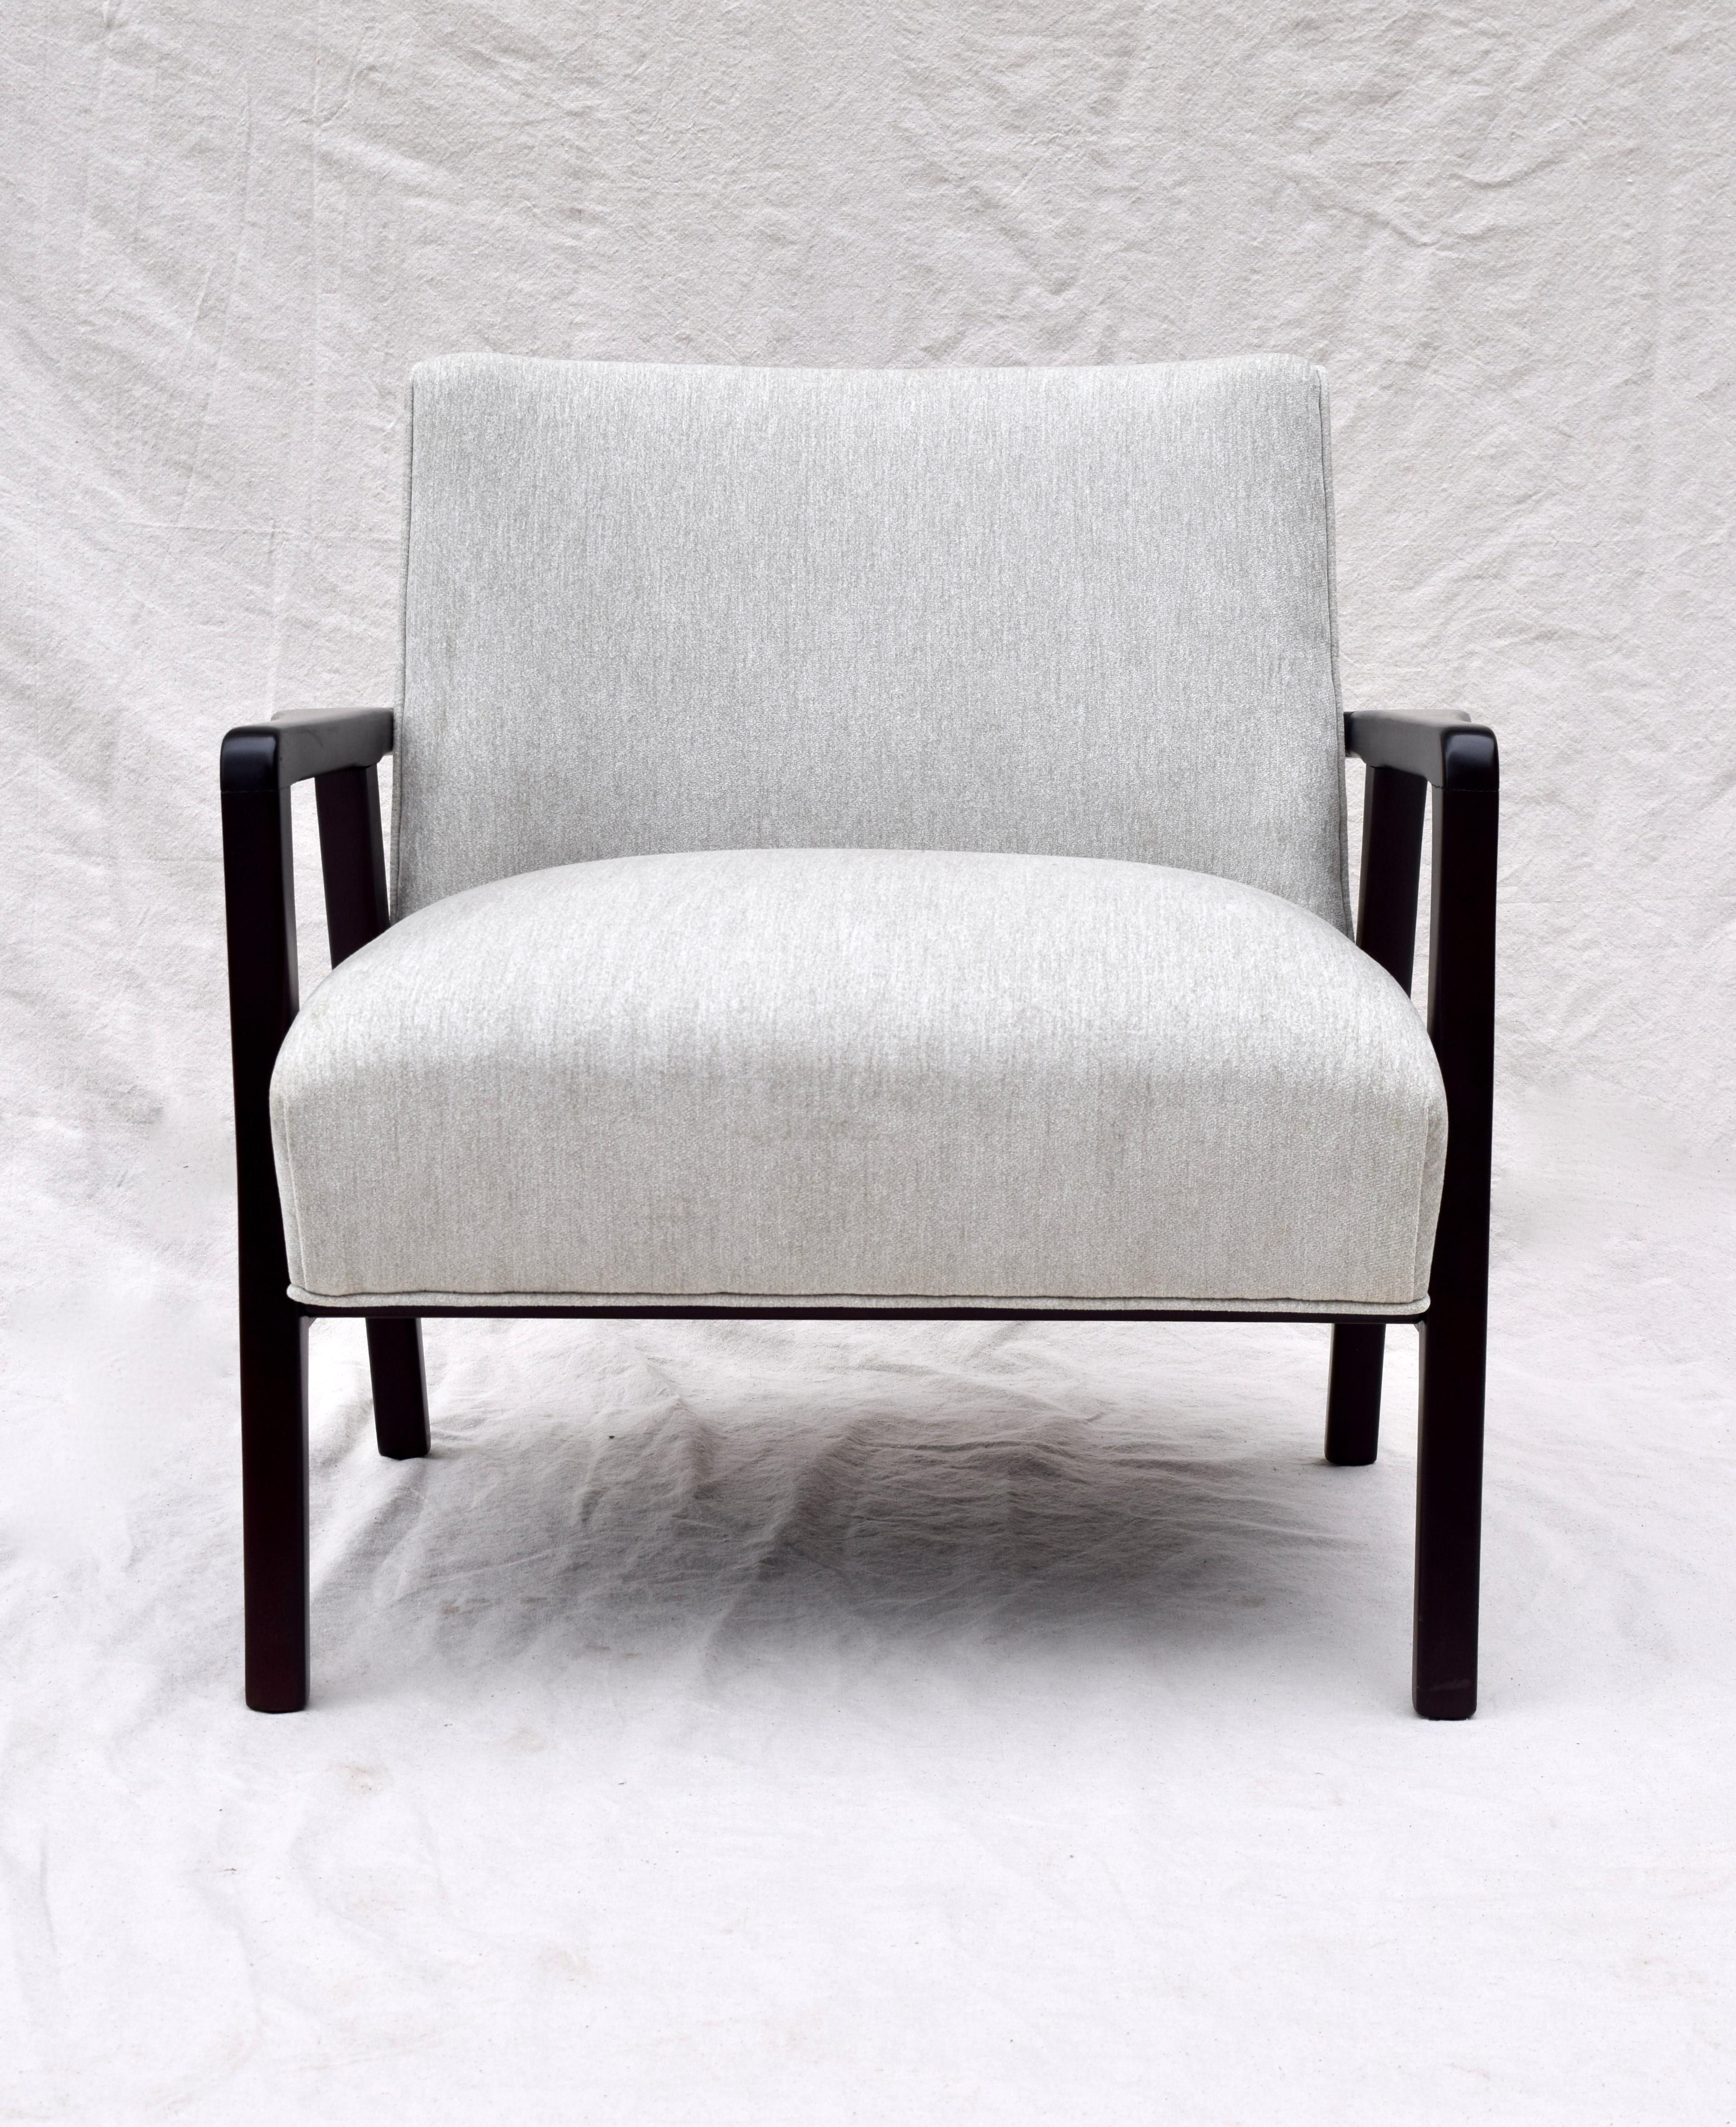 Fully restored 1950s lounge chair of extraordinary construction. This popular midcentury and Danish Modern style can also be seen in the works of Edward Wormley for Dunbar & Widdicomb Designs. With careful attention to maintain the re-tied spring